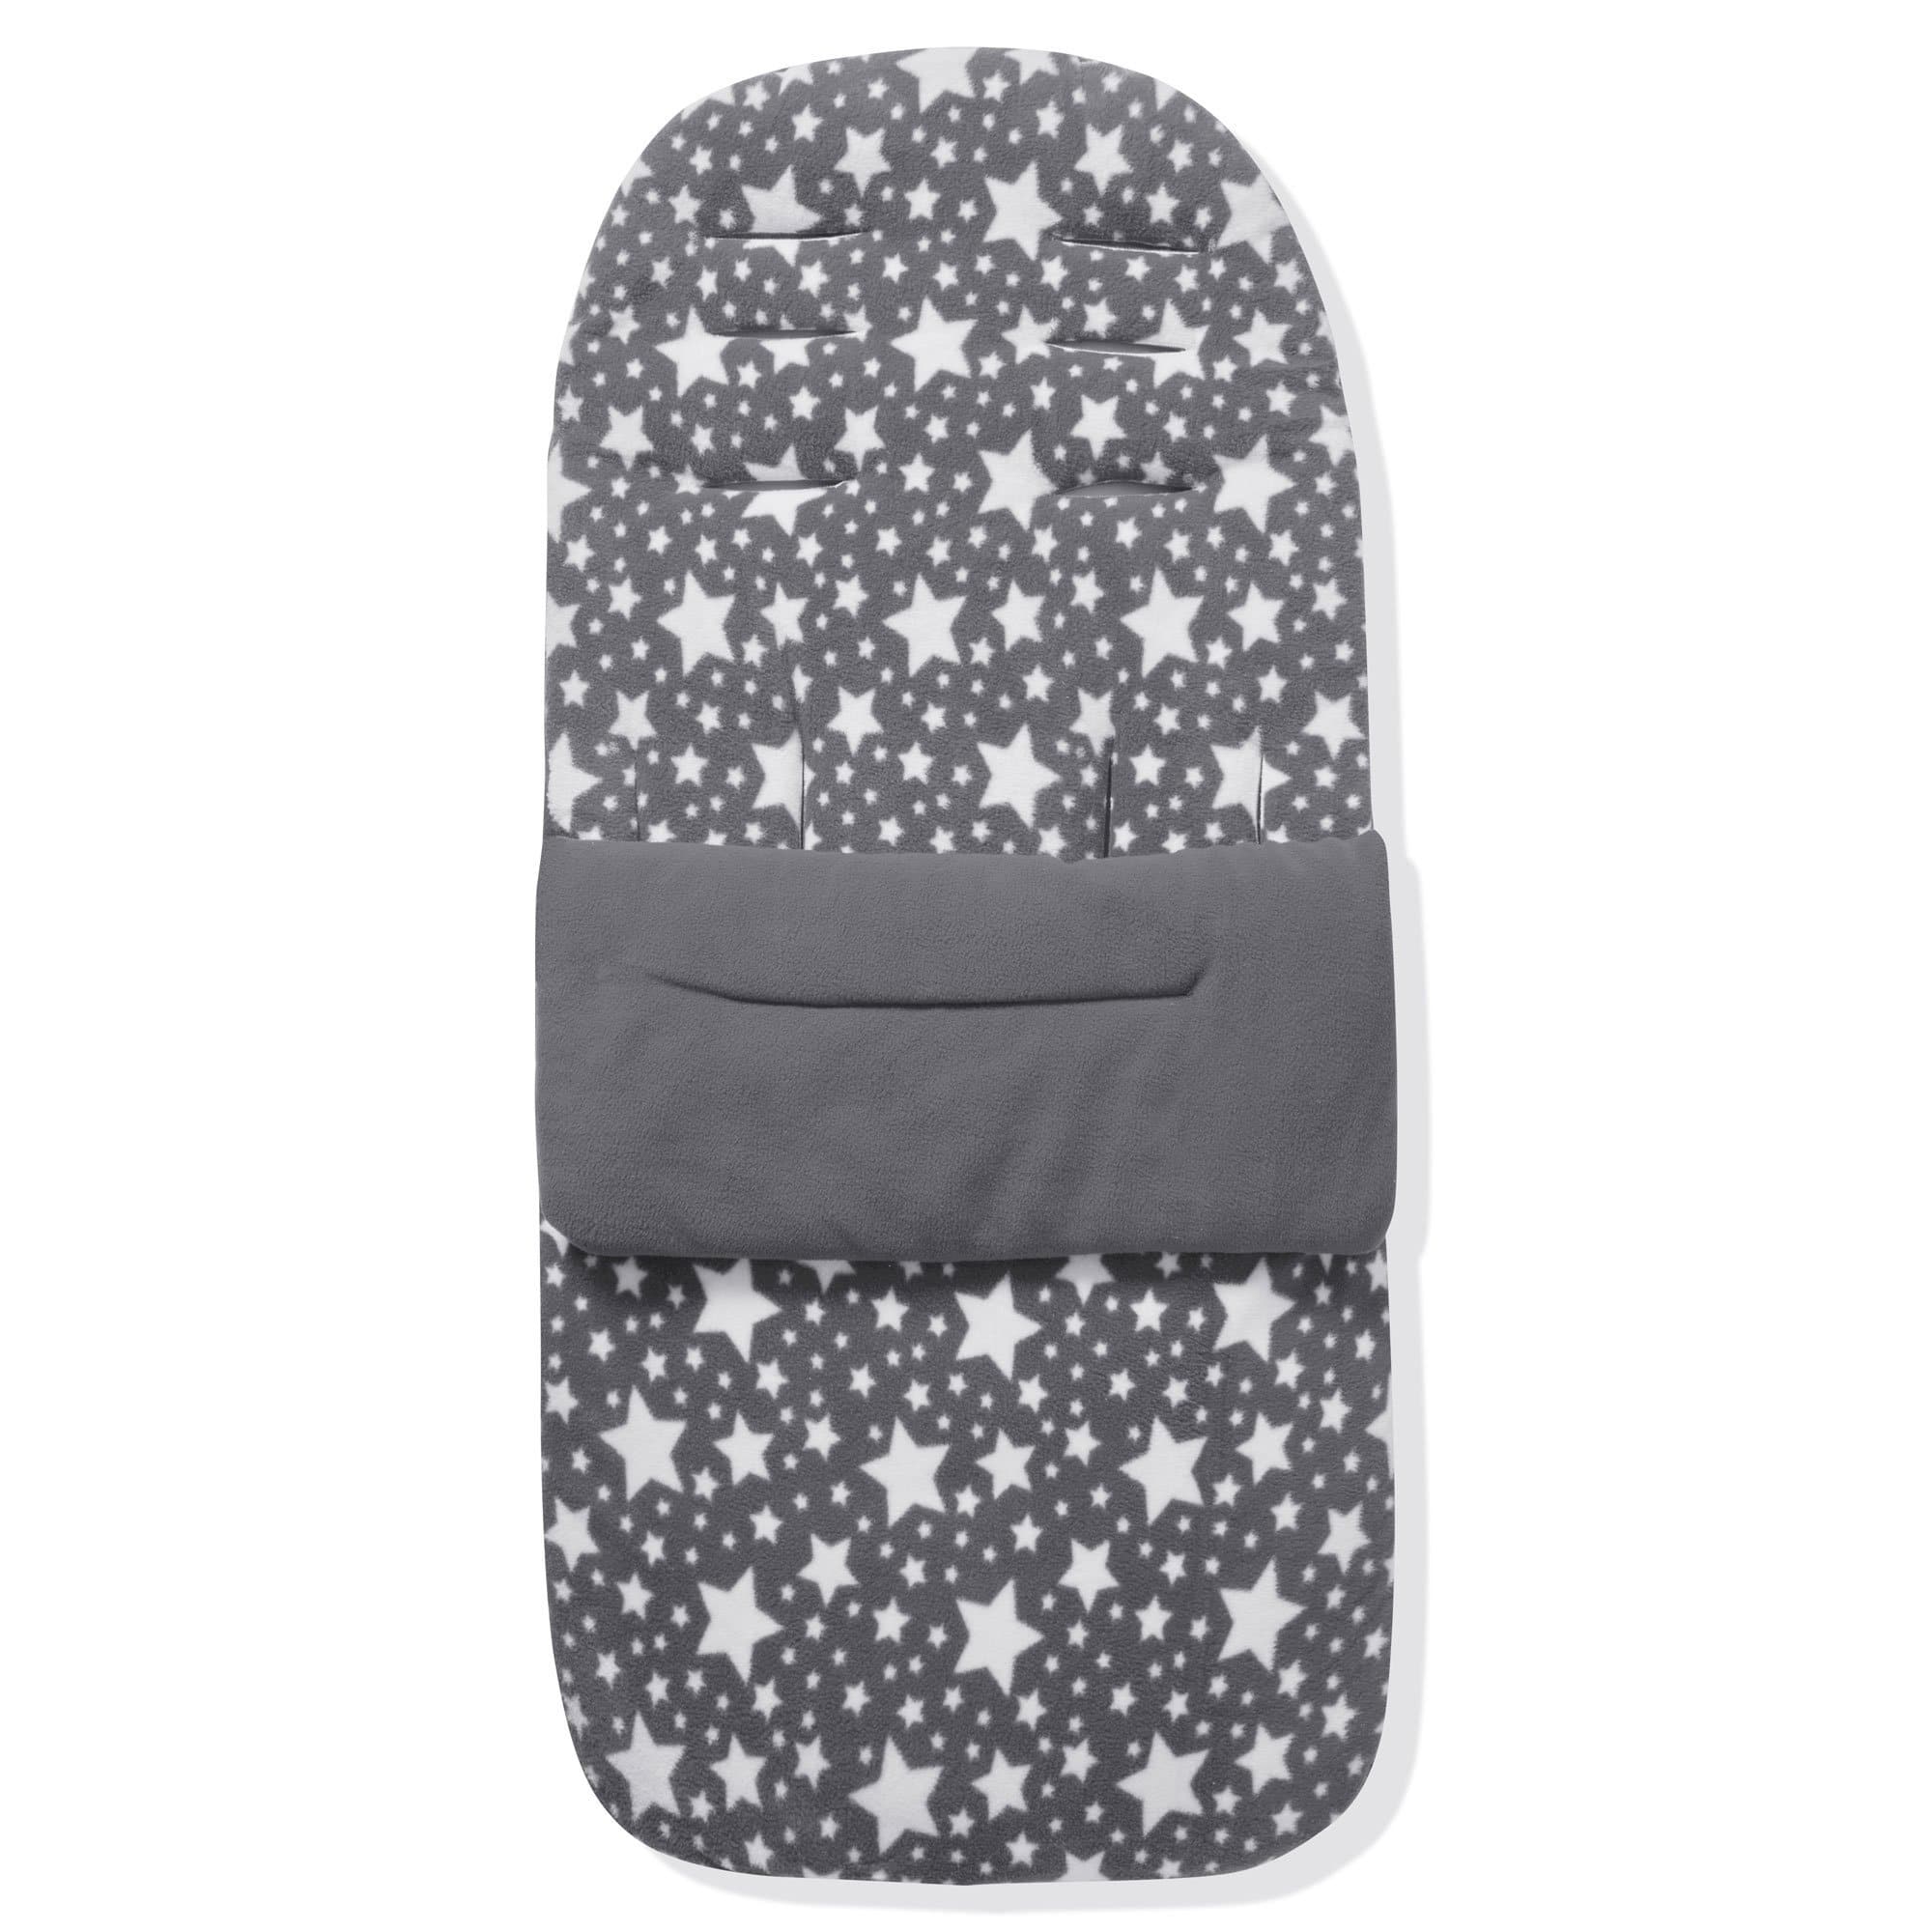 Fleece Footmuff / Cosy Toes Compatible with Teutonia - For Your Little One